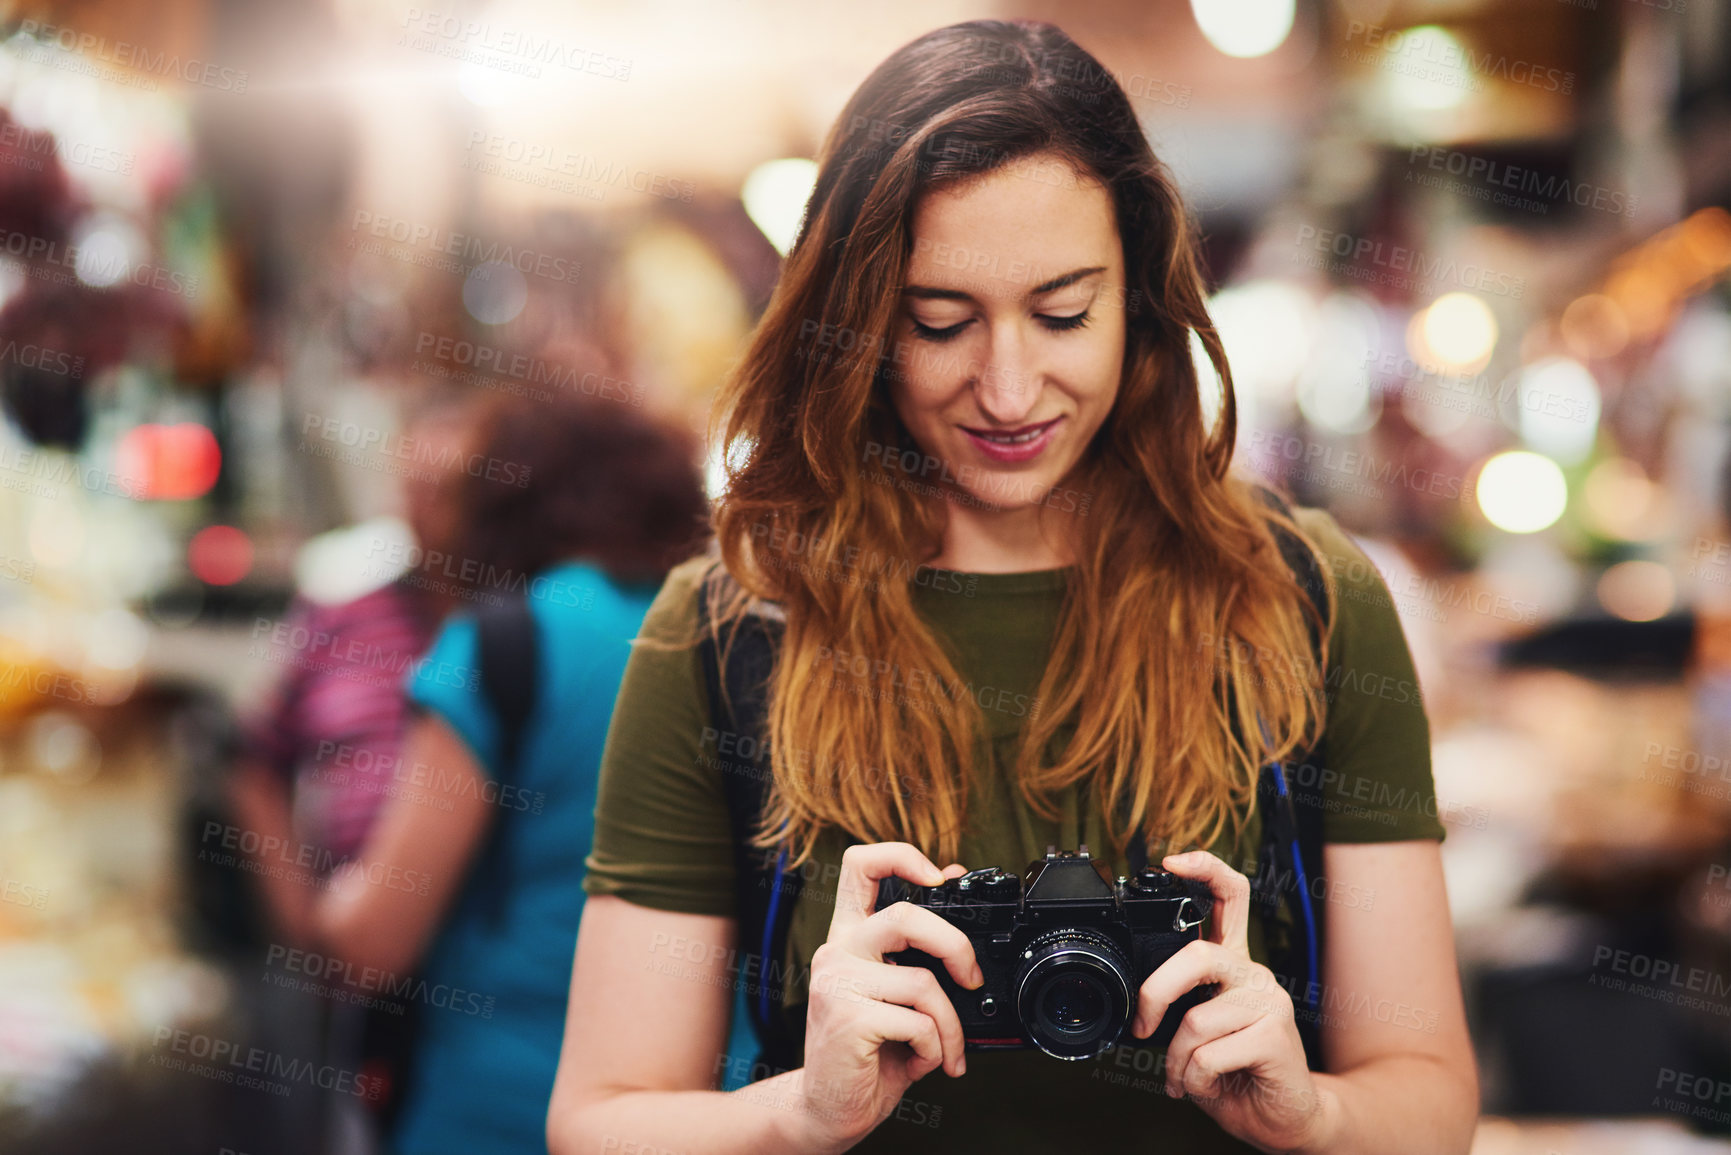 Buy stock photo Shot of a cheerful young woman holding a camera and looking on the screen while standing at a market outside during the day